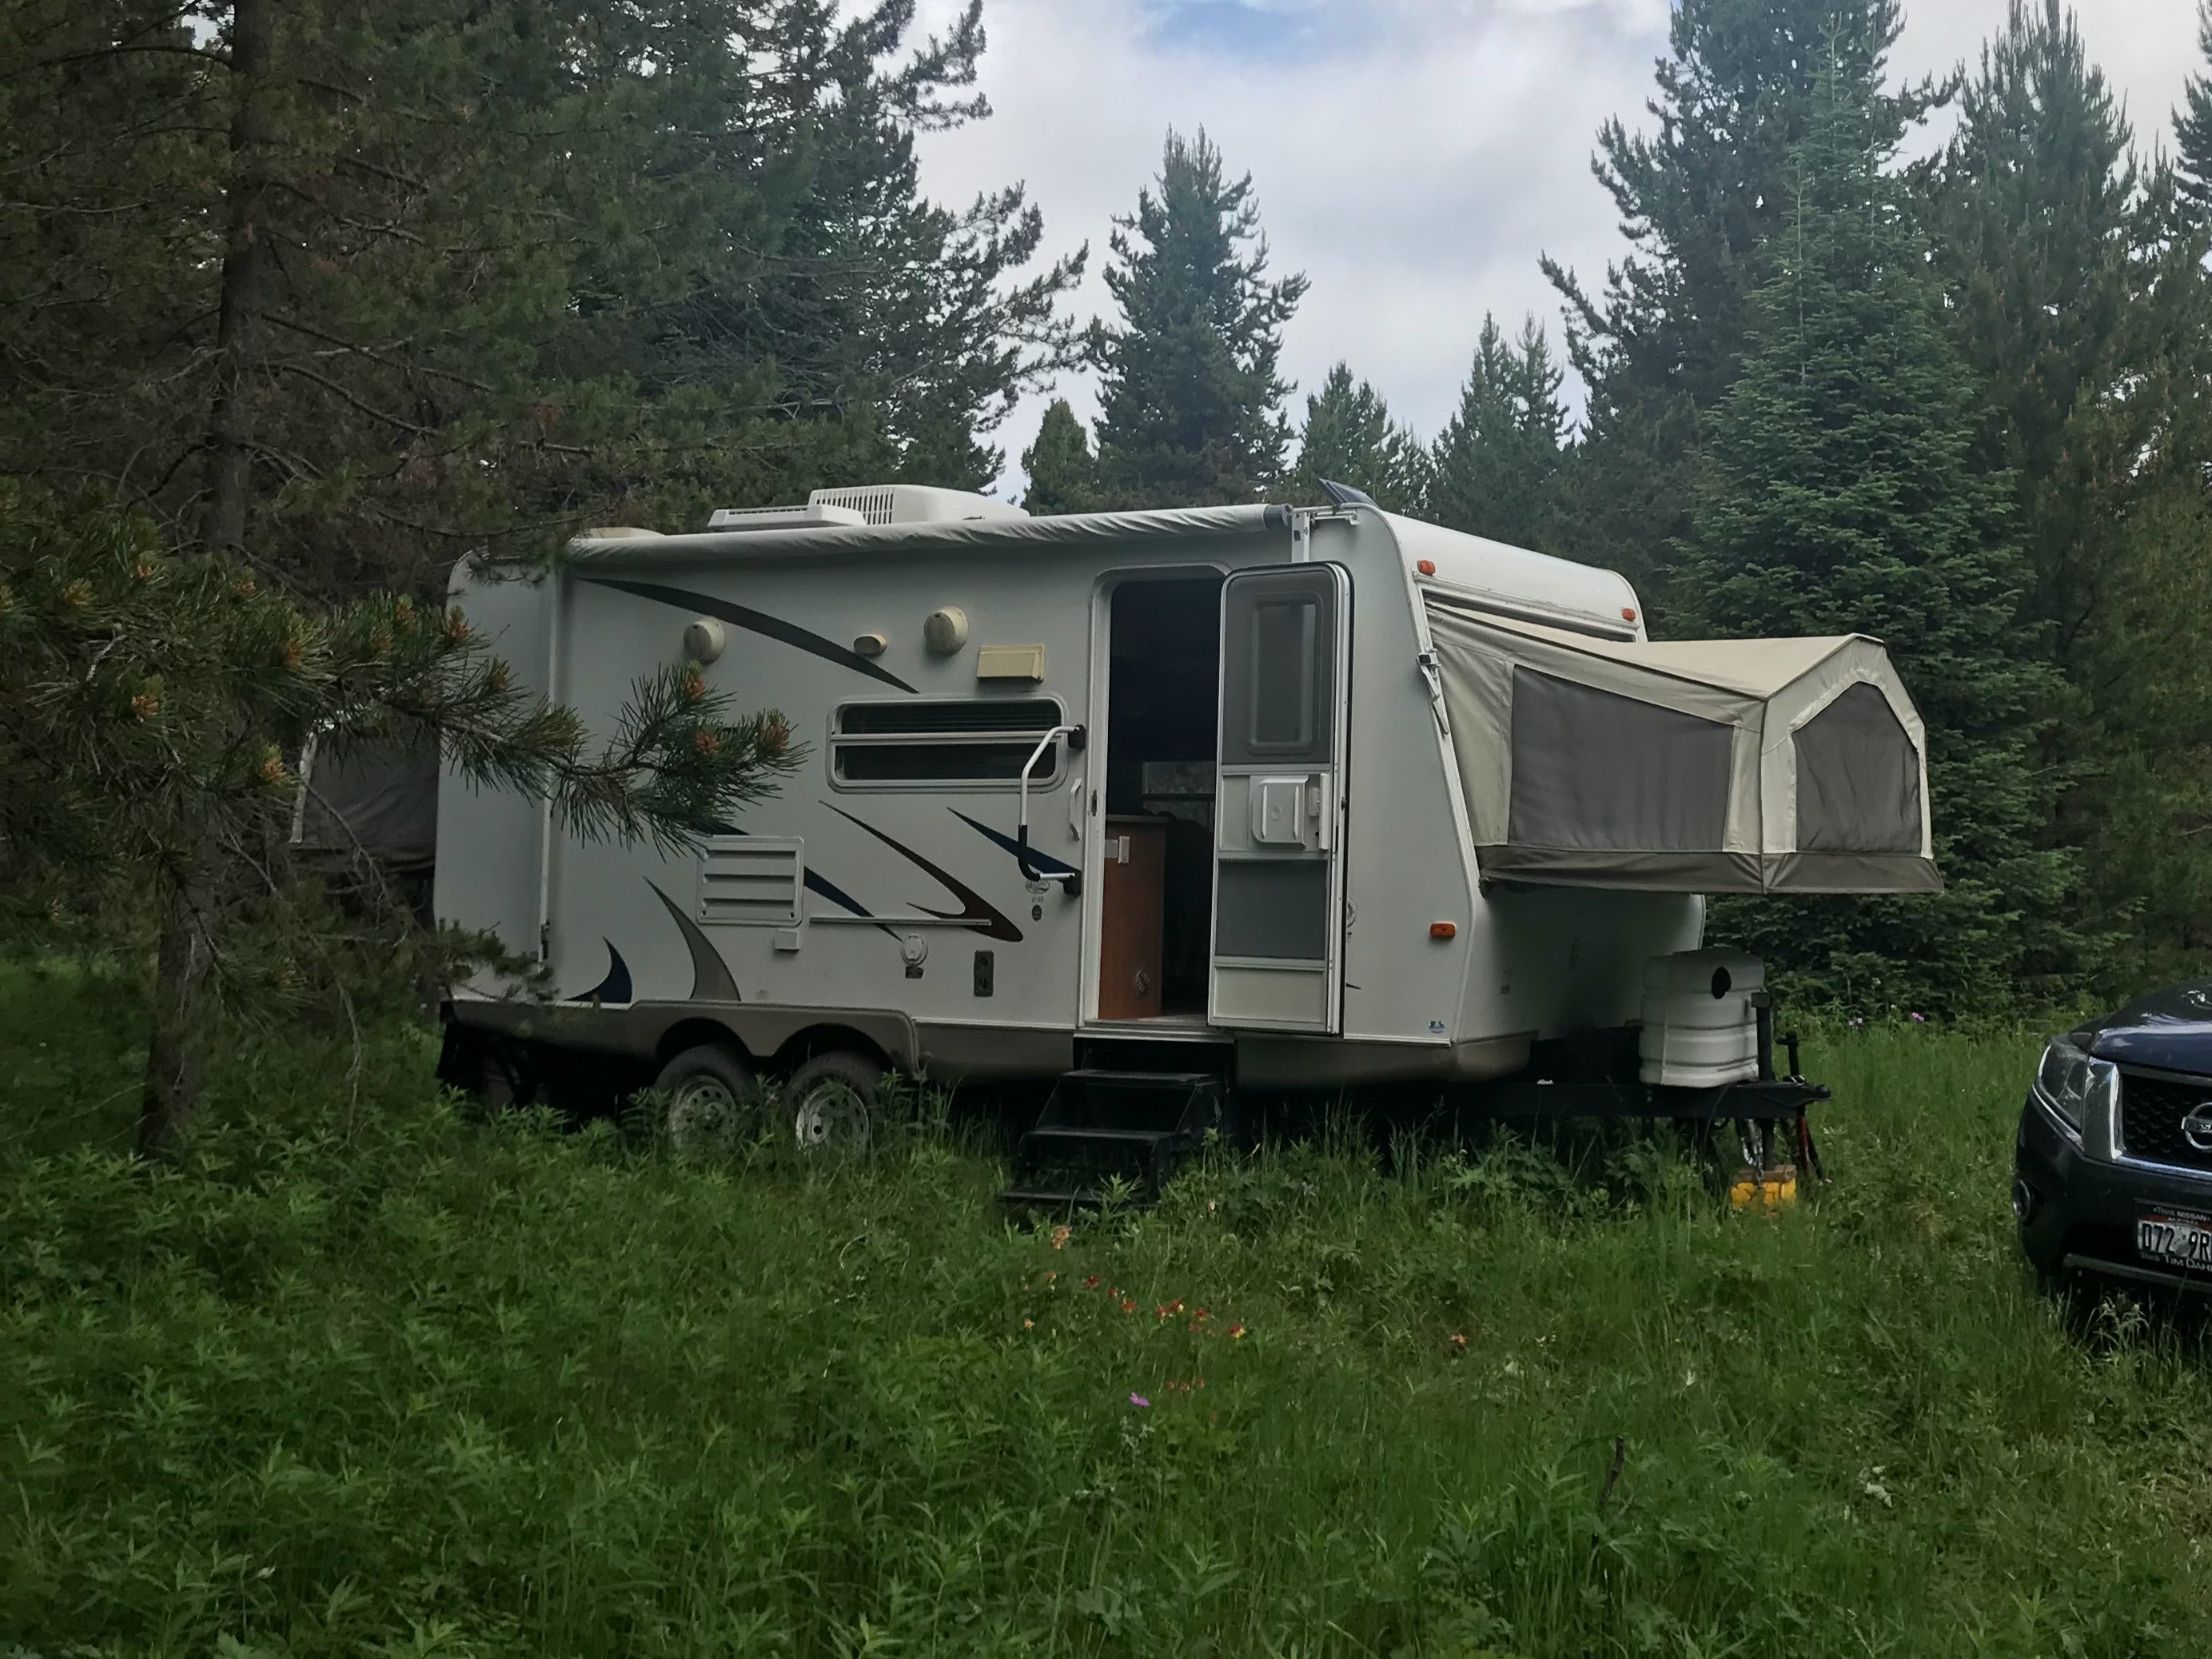 Camper submitted image from Bootjack Dispersed Camping - 4